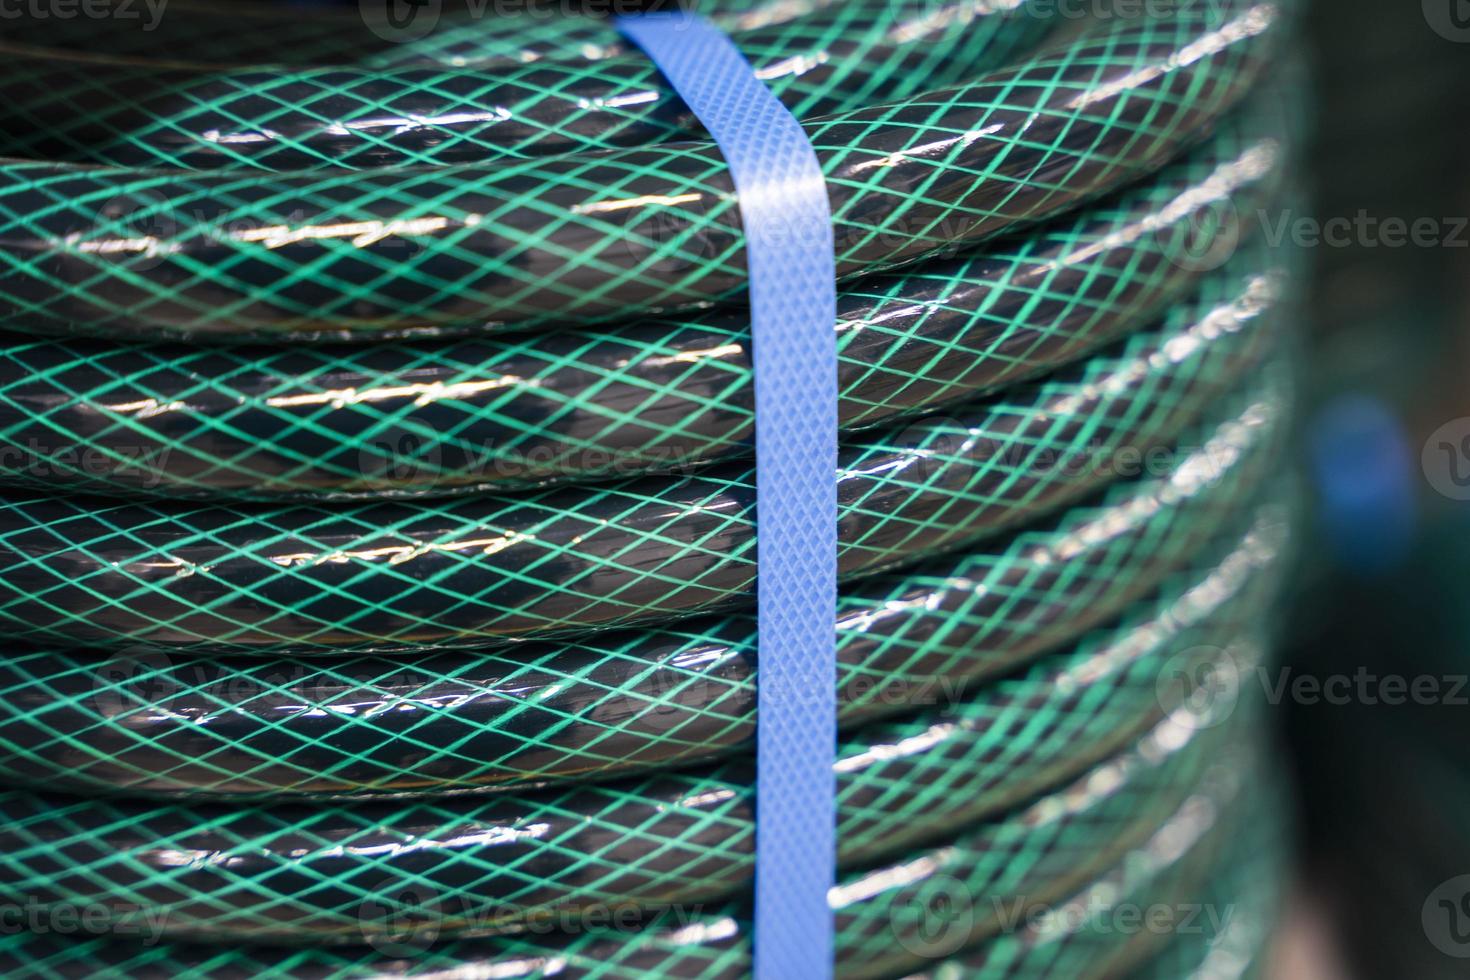 New green garden watering hose wound into a bay photo